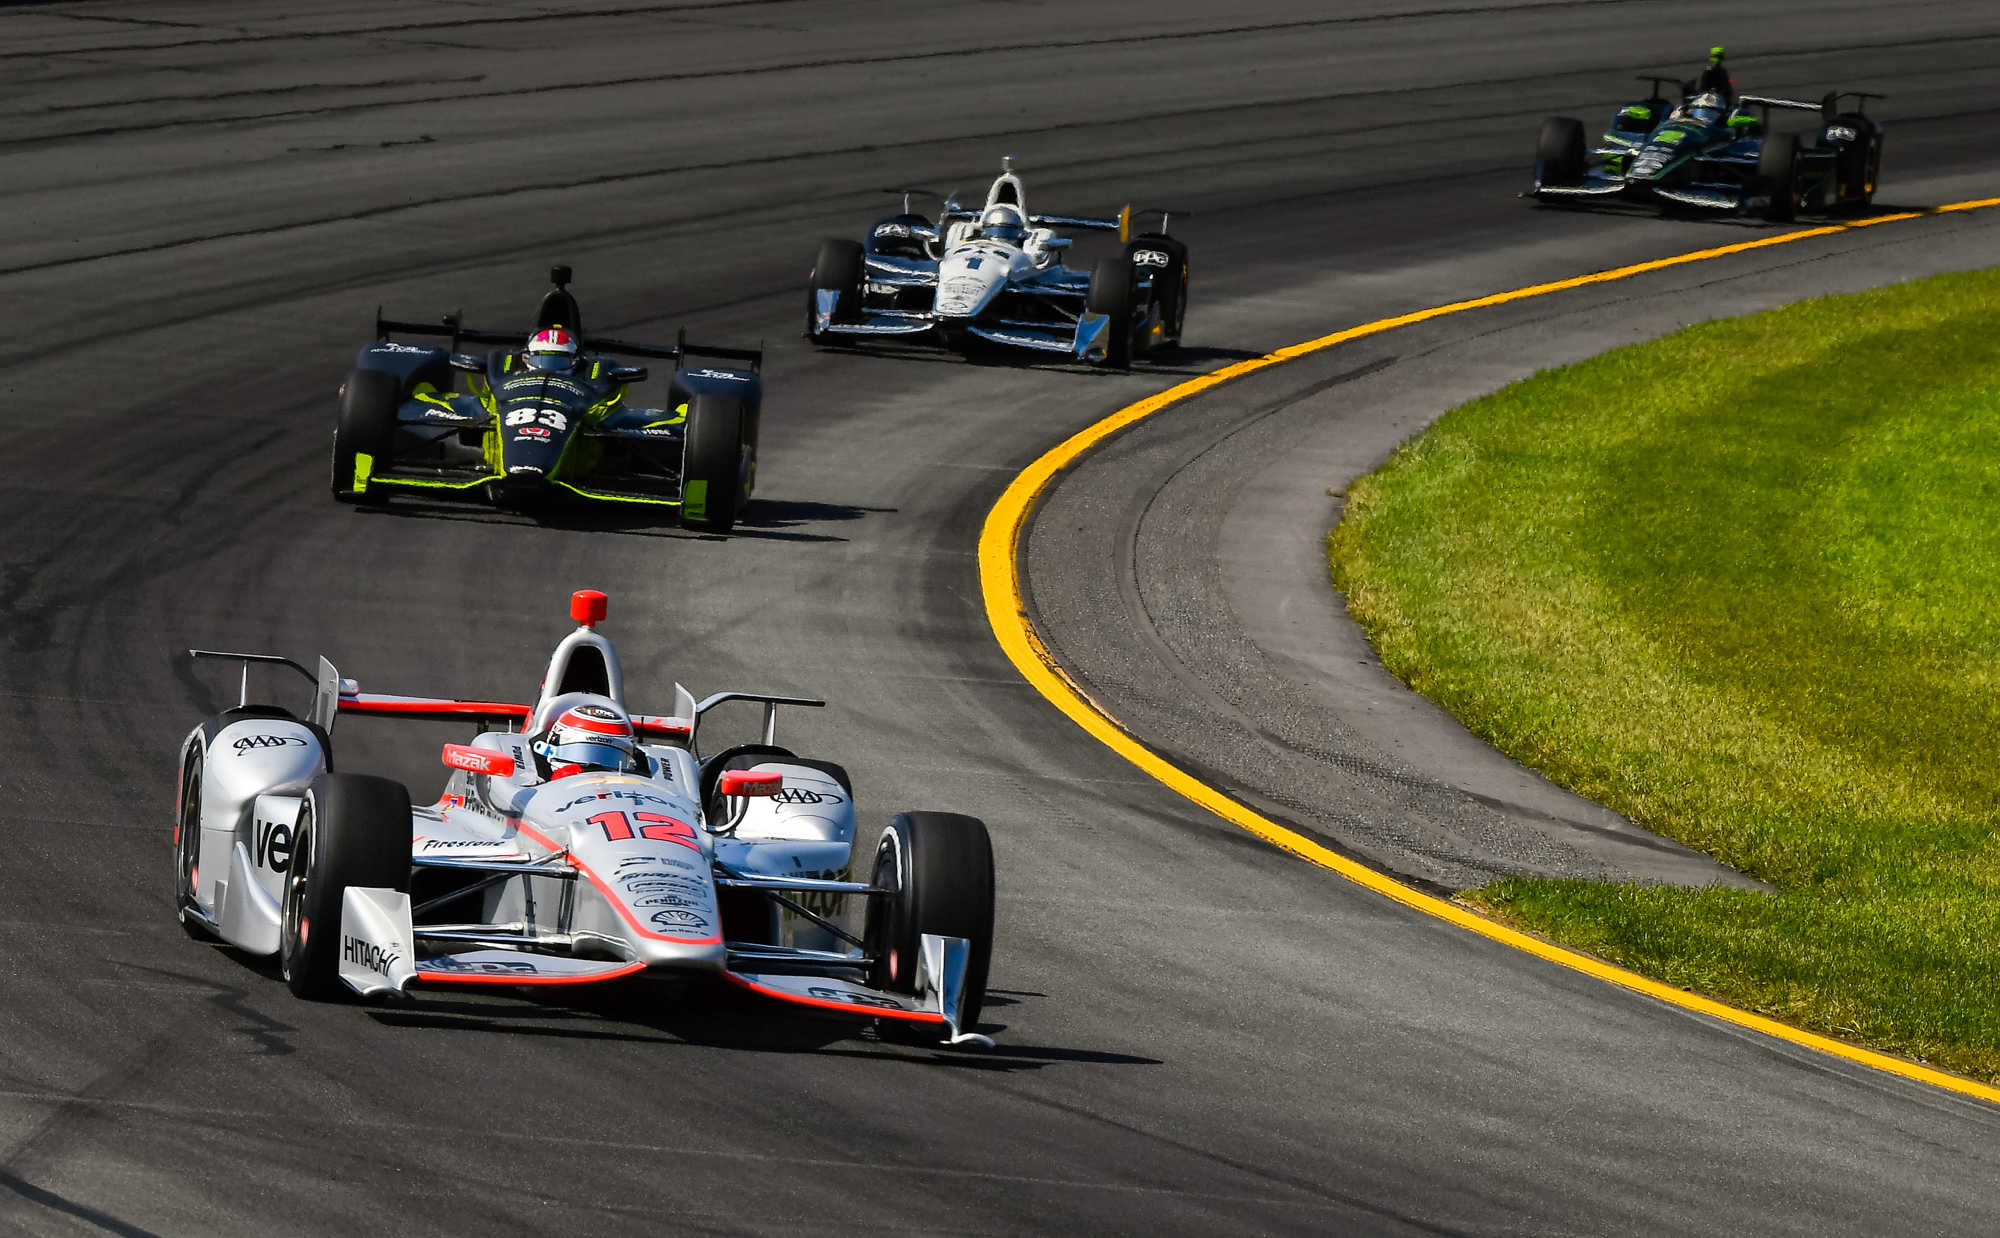 Would IndyCars race better or worse with traction compound at Pocono?